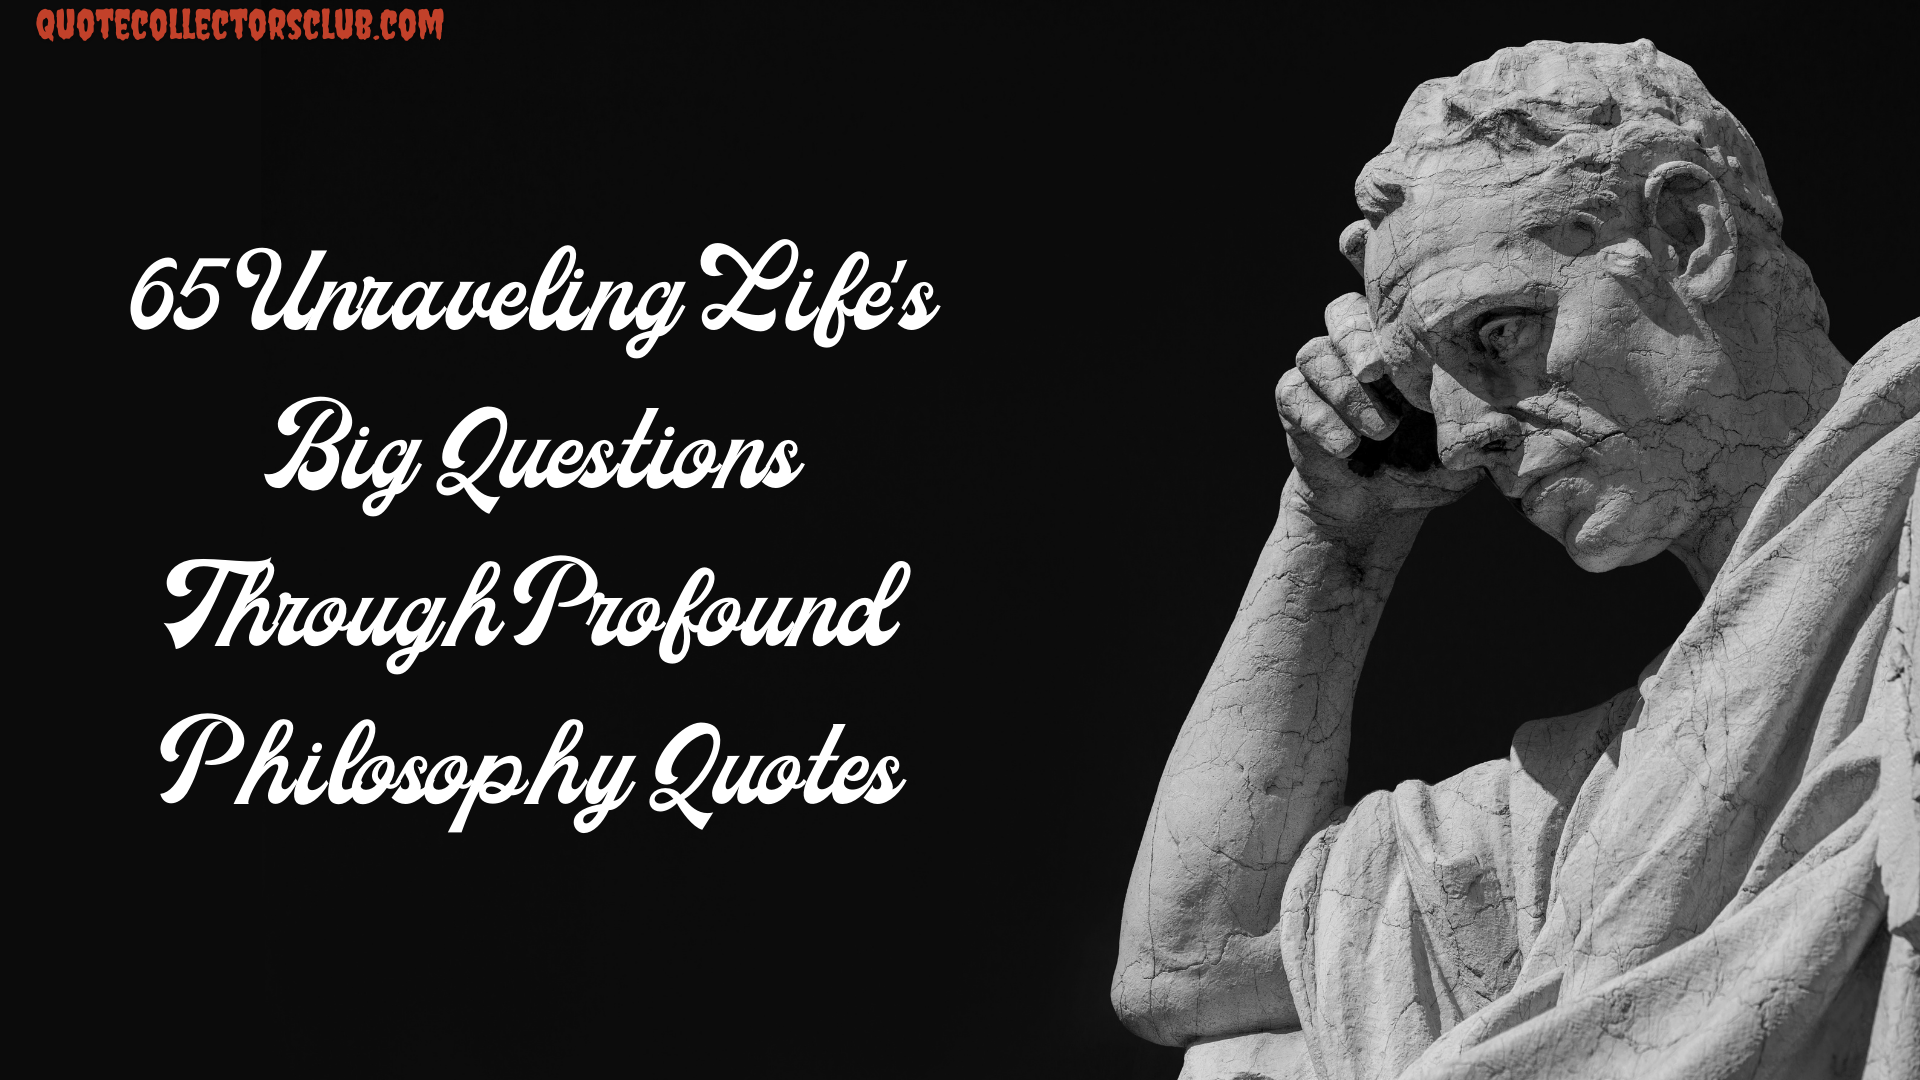 65 Unraveling Life's Big Questions Through Profound Philosophy Quotes